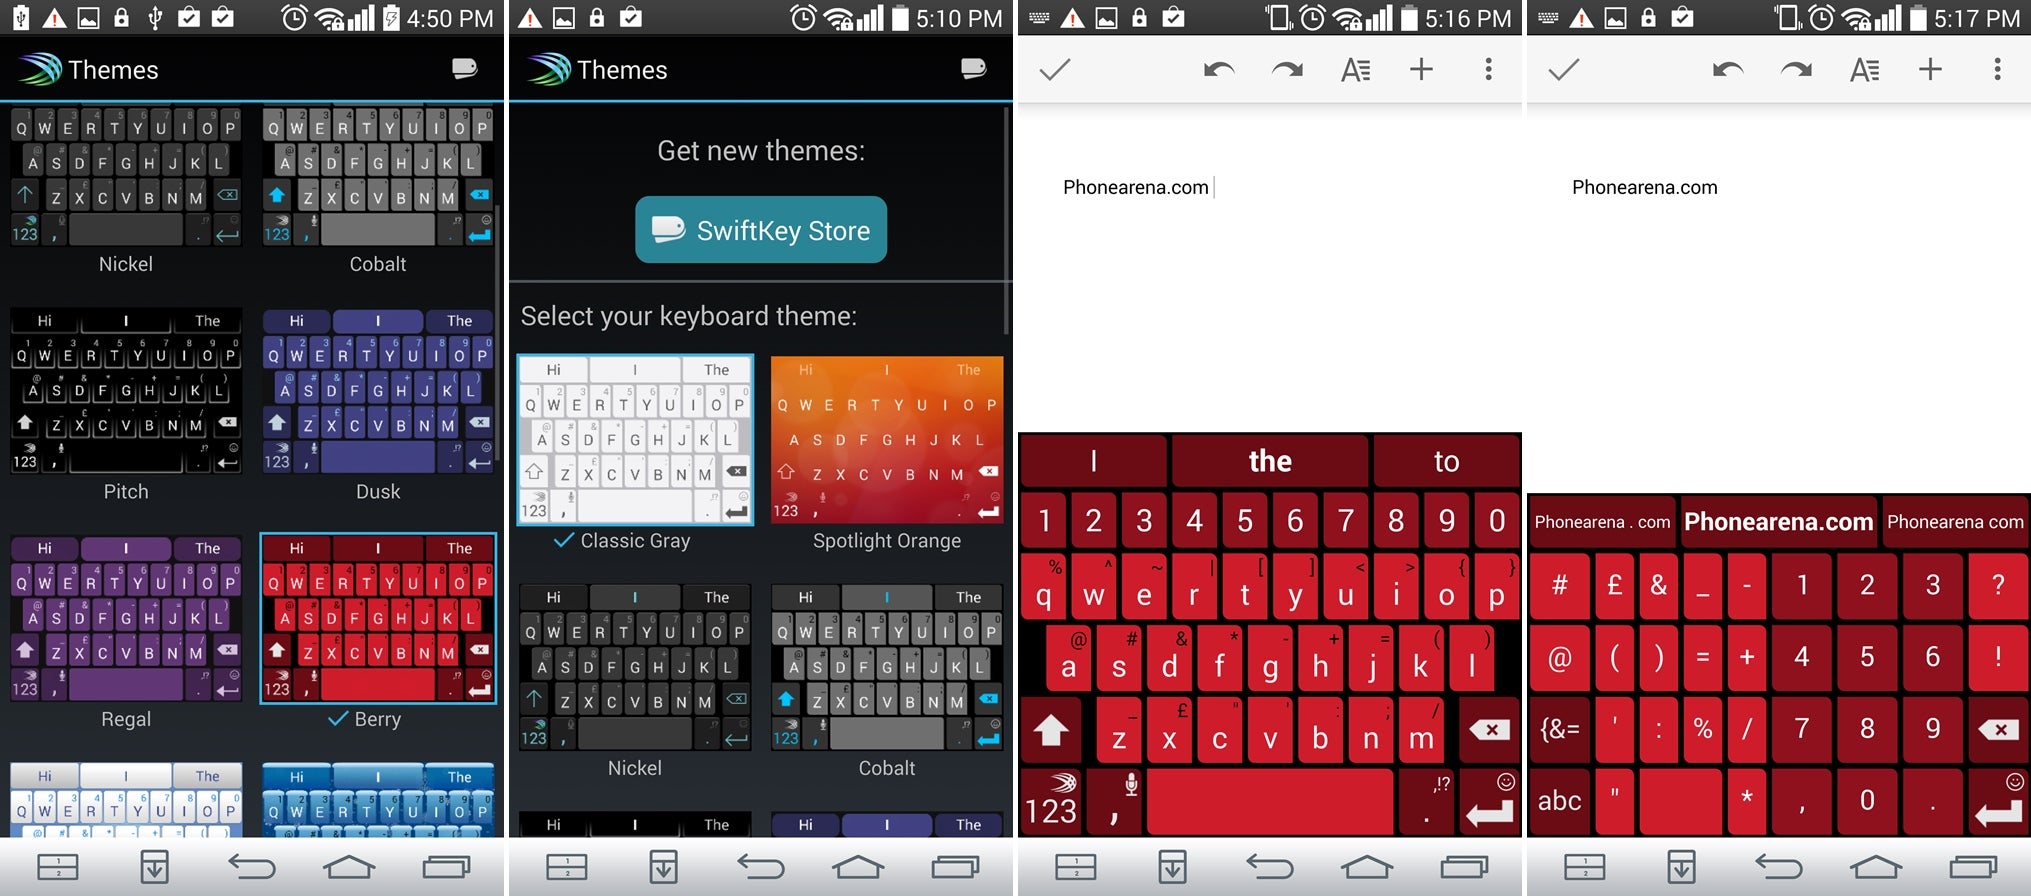 Android keyboard app shoot-out - Fleksy, Minuum, Swiftkey, and Swype battle for glory